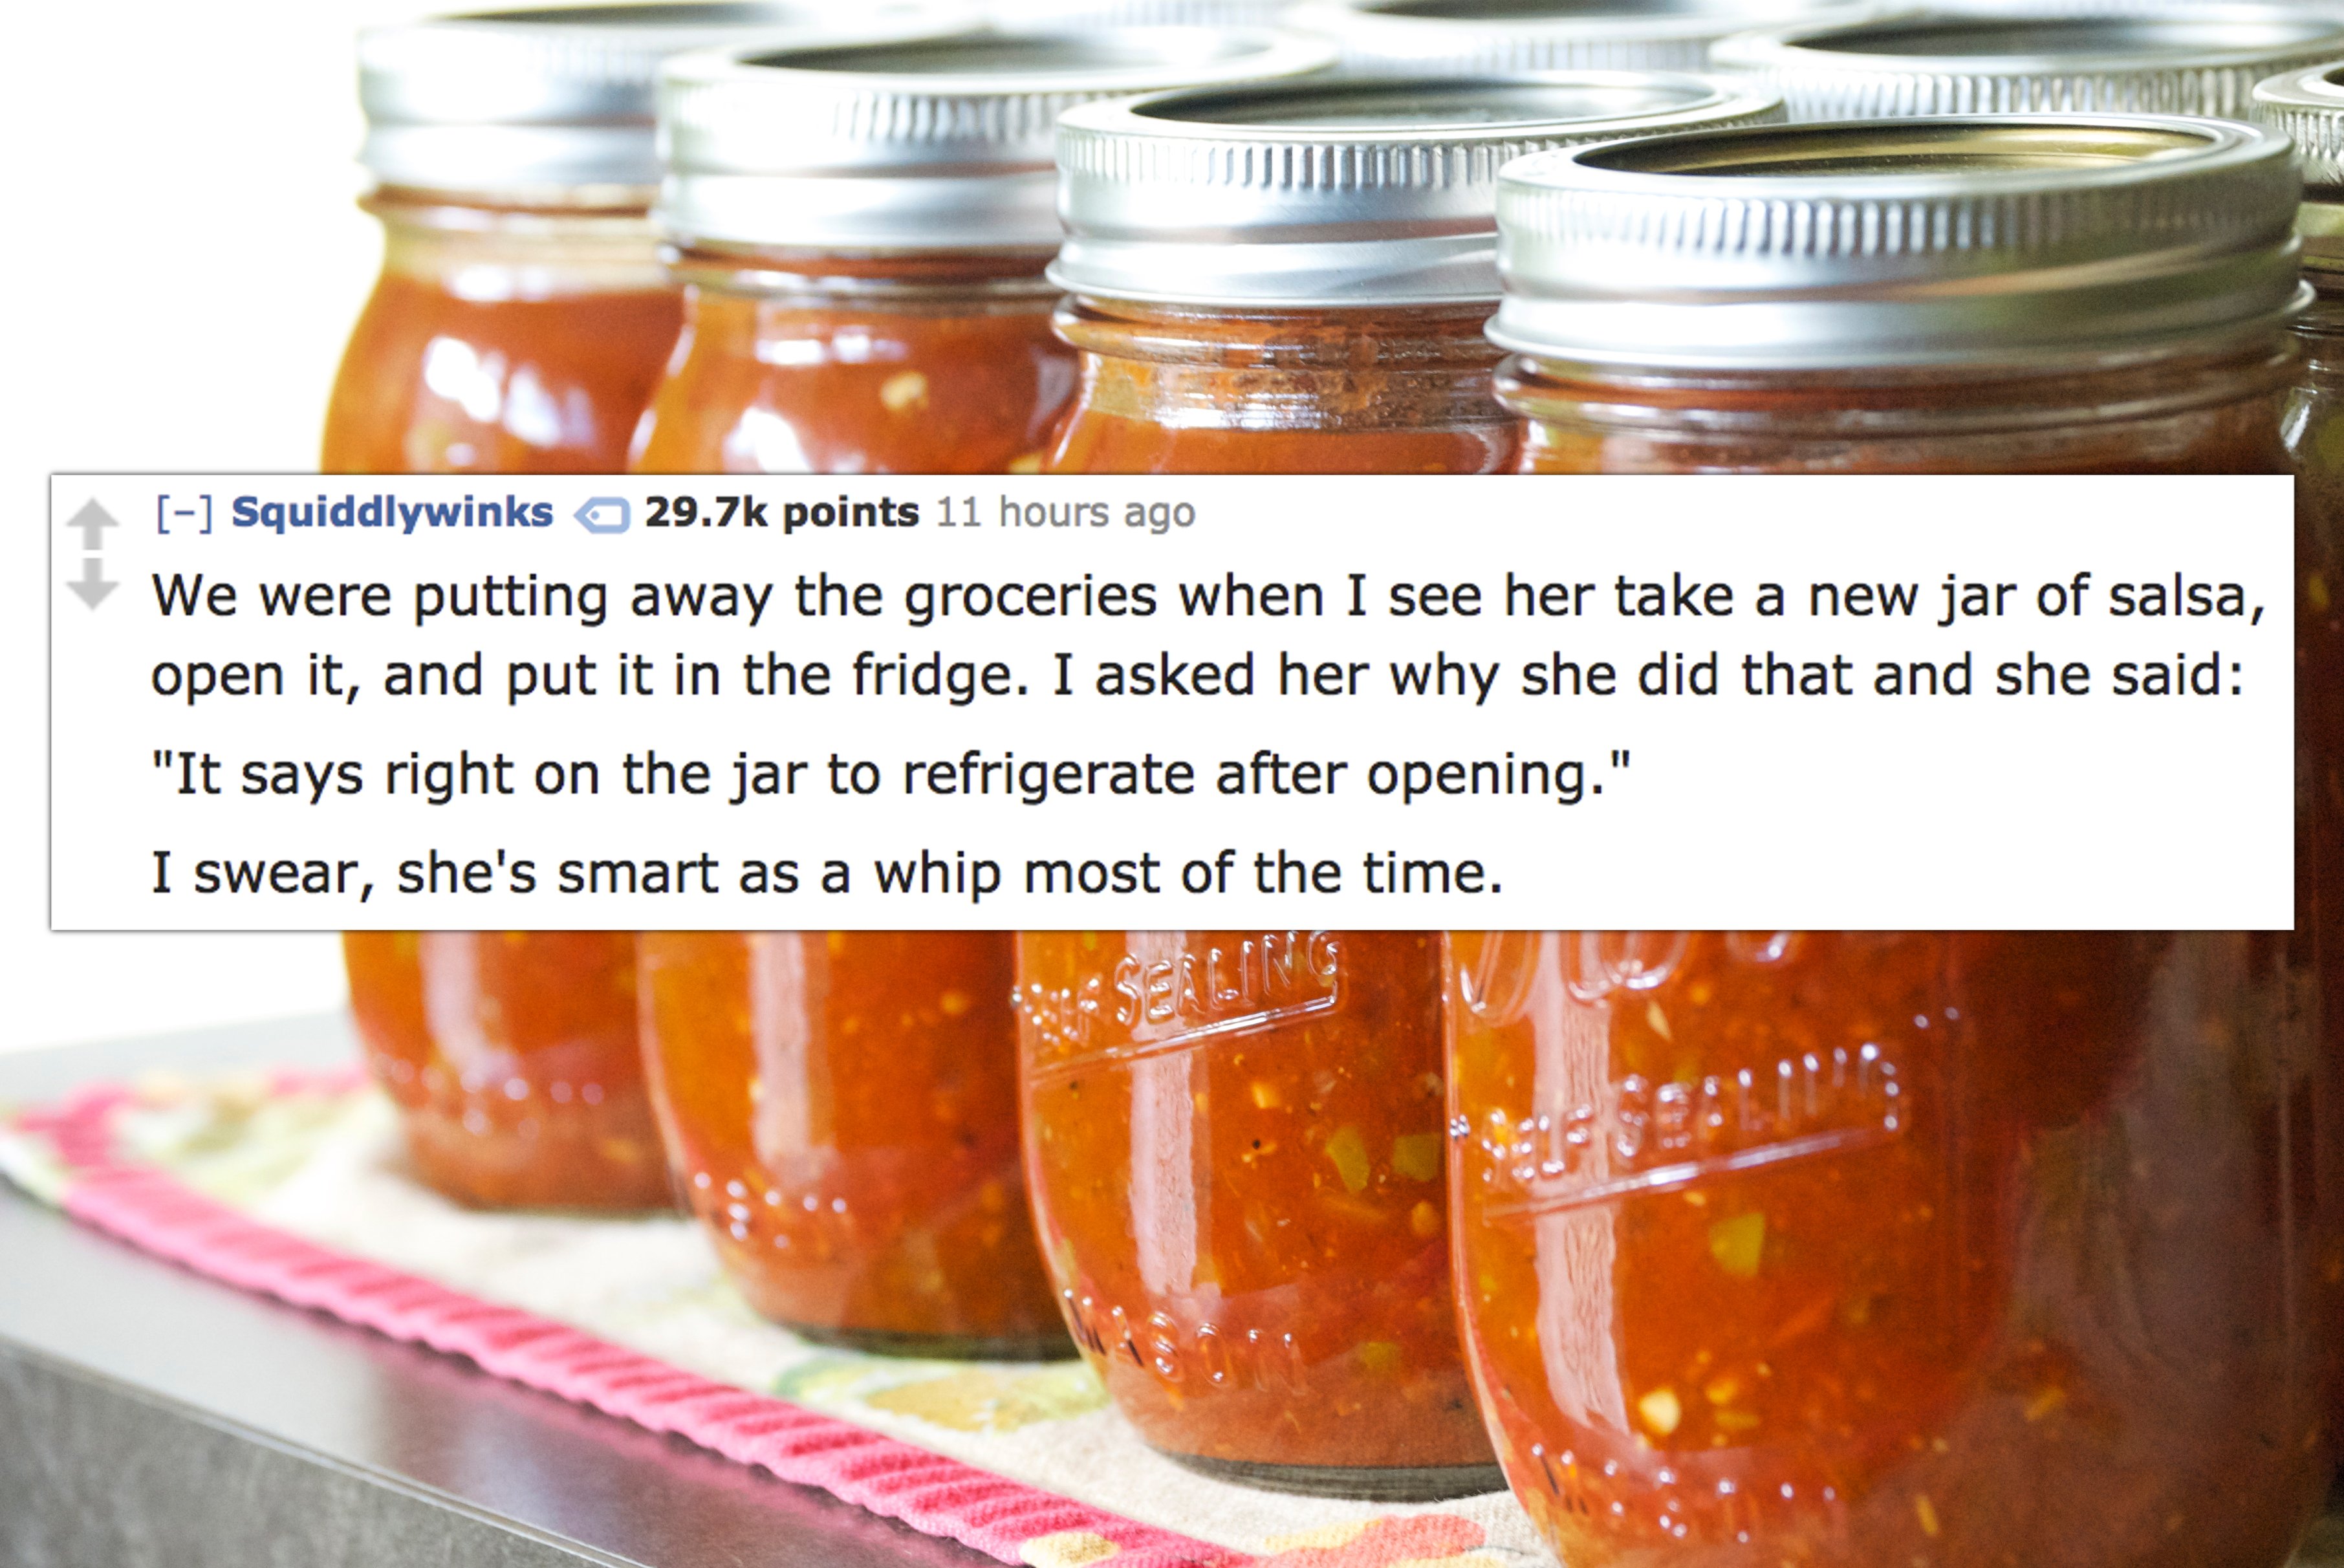 mason jar - Squiddlywinks points 11 hours ago We were putting away the groceries when I see her take a new jar of salsa, open it, and put it in the fridge. I asked her why she did that and she said "It says right on the jar to refrigerate after opening." 